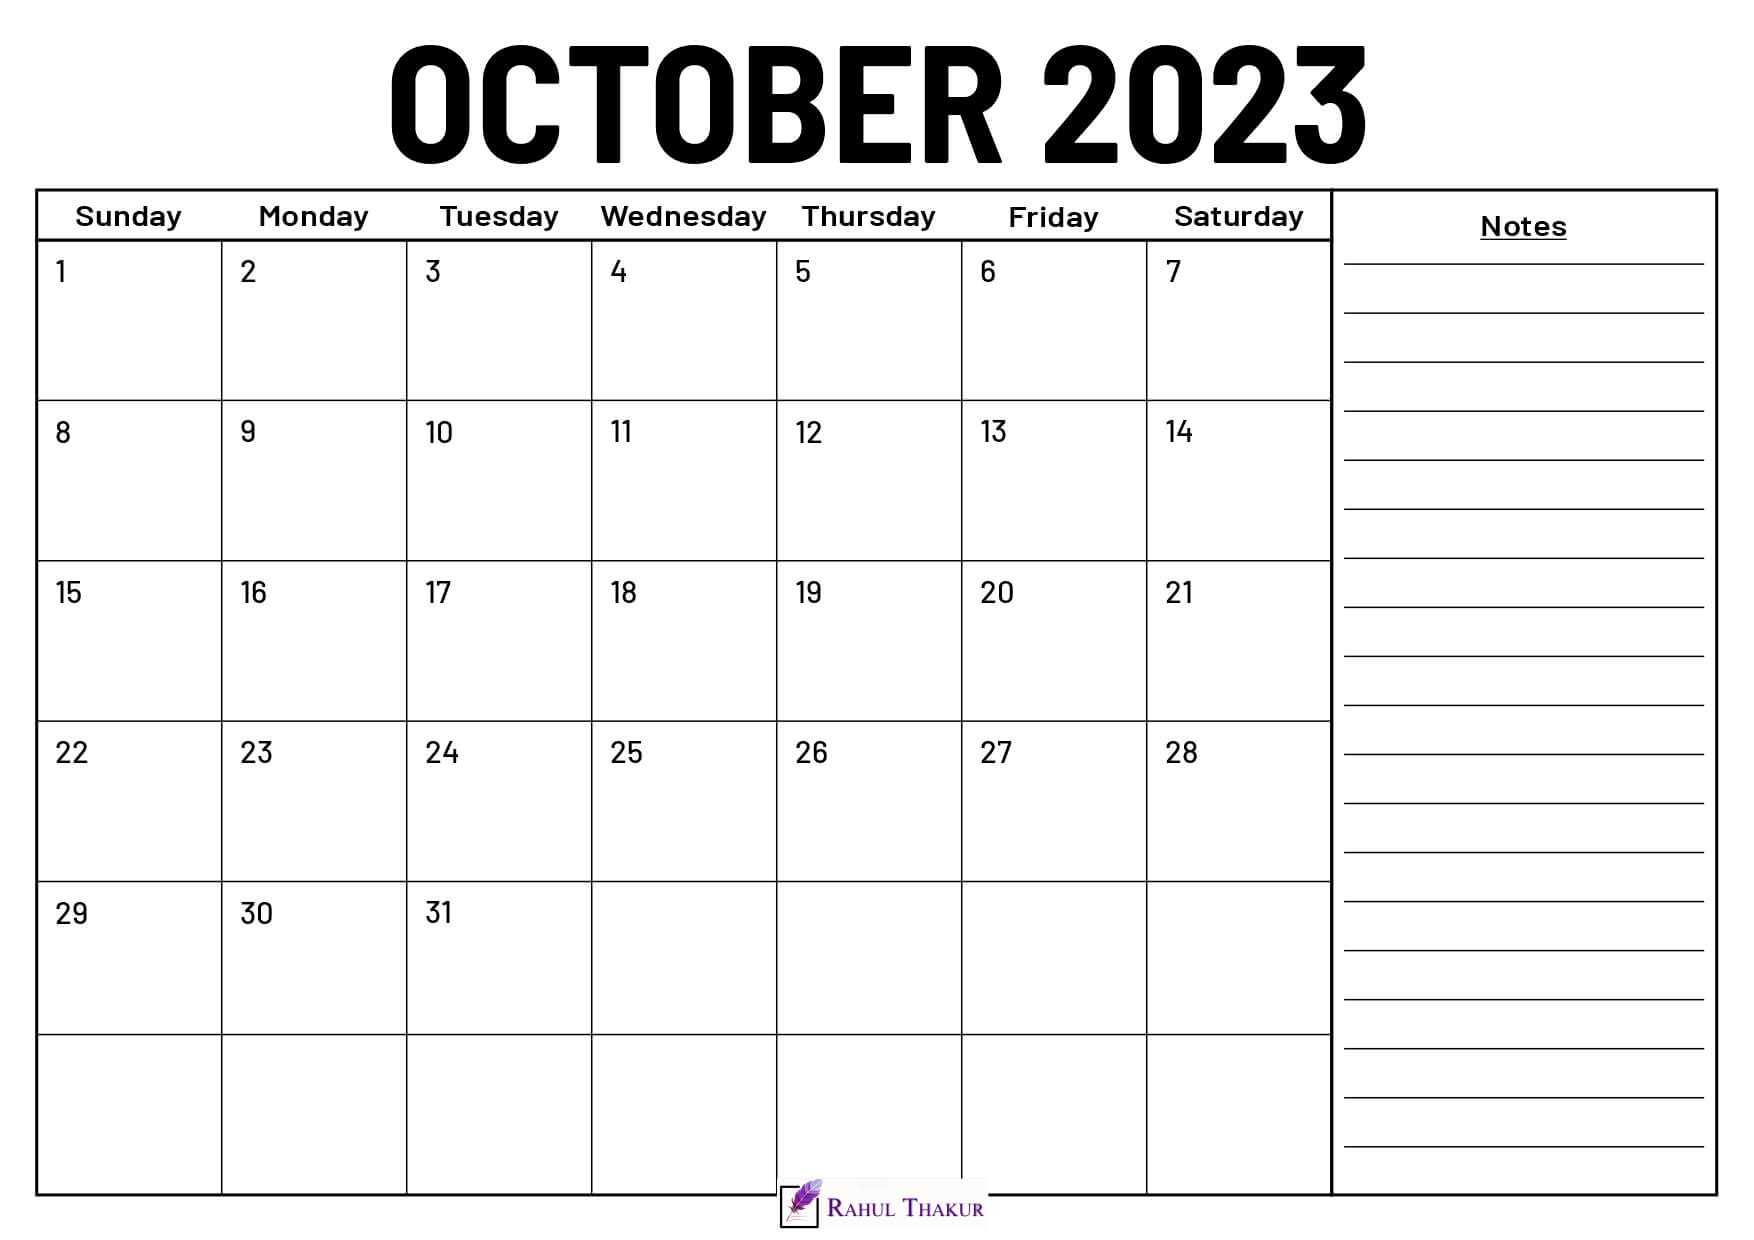 October 2023 Calendar With Notes